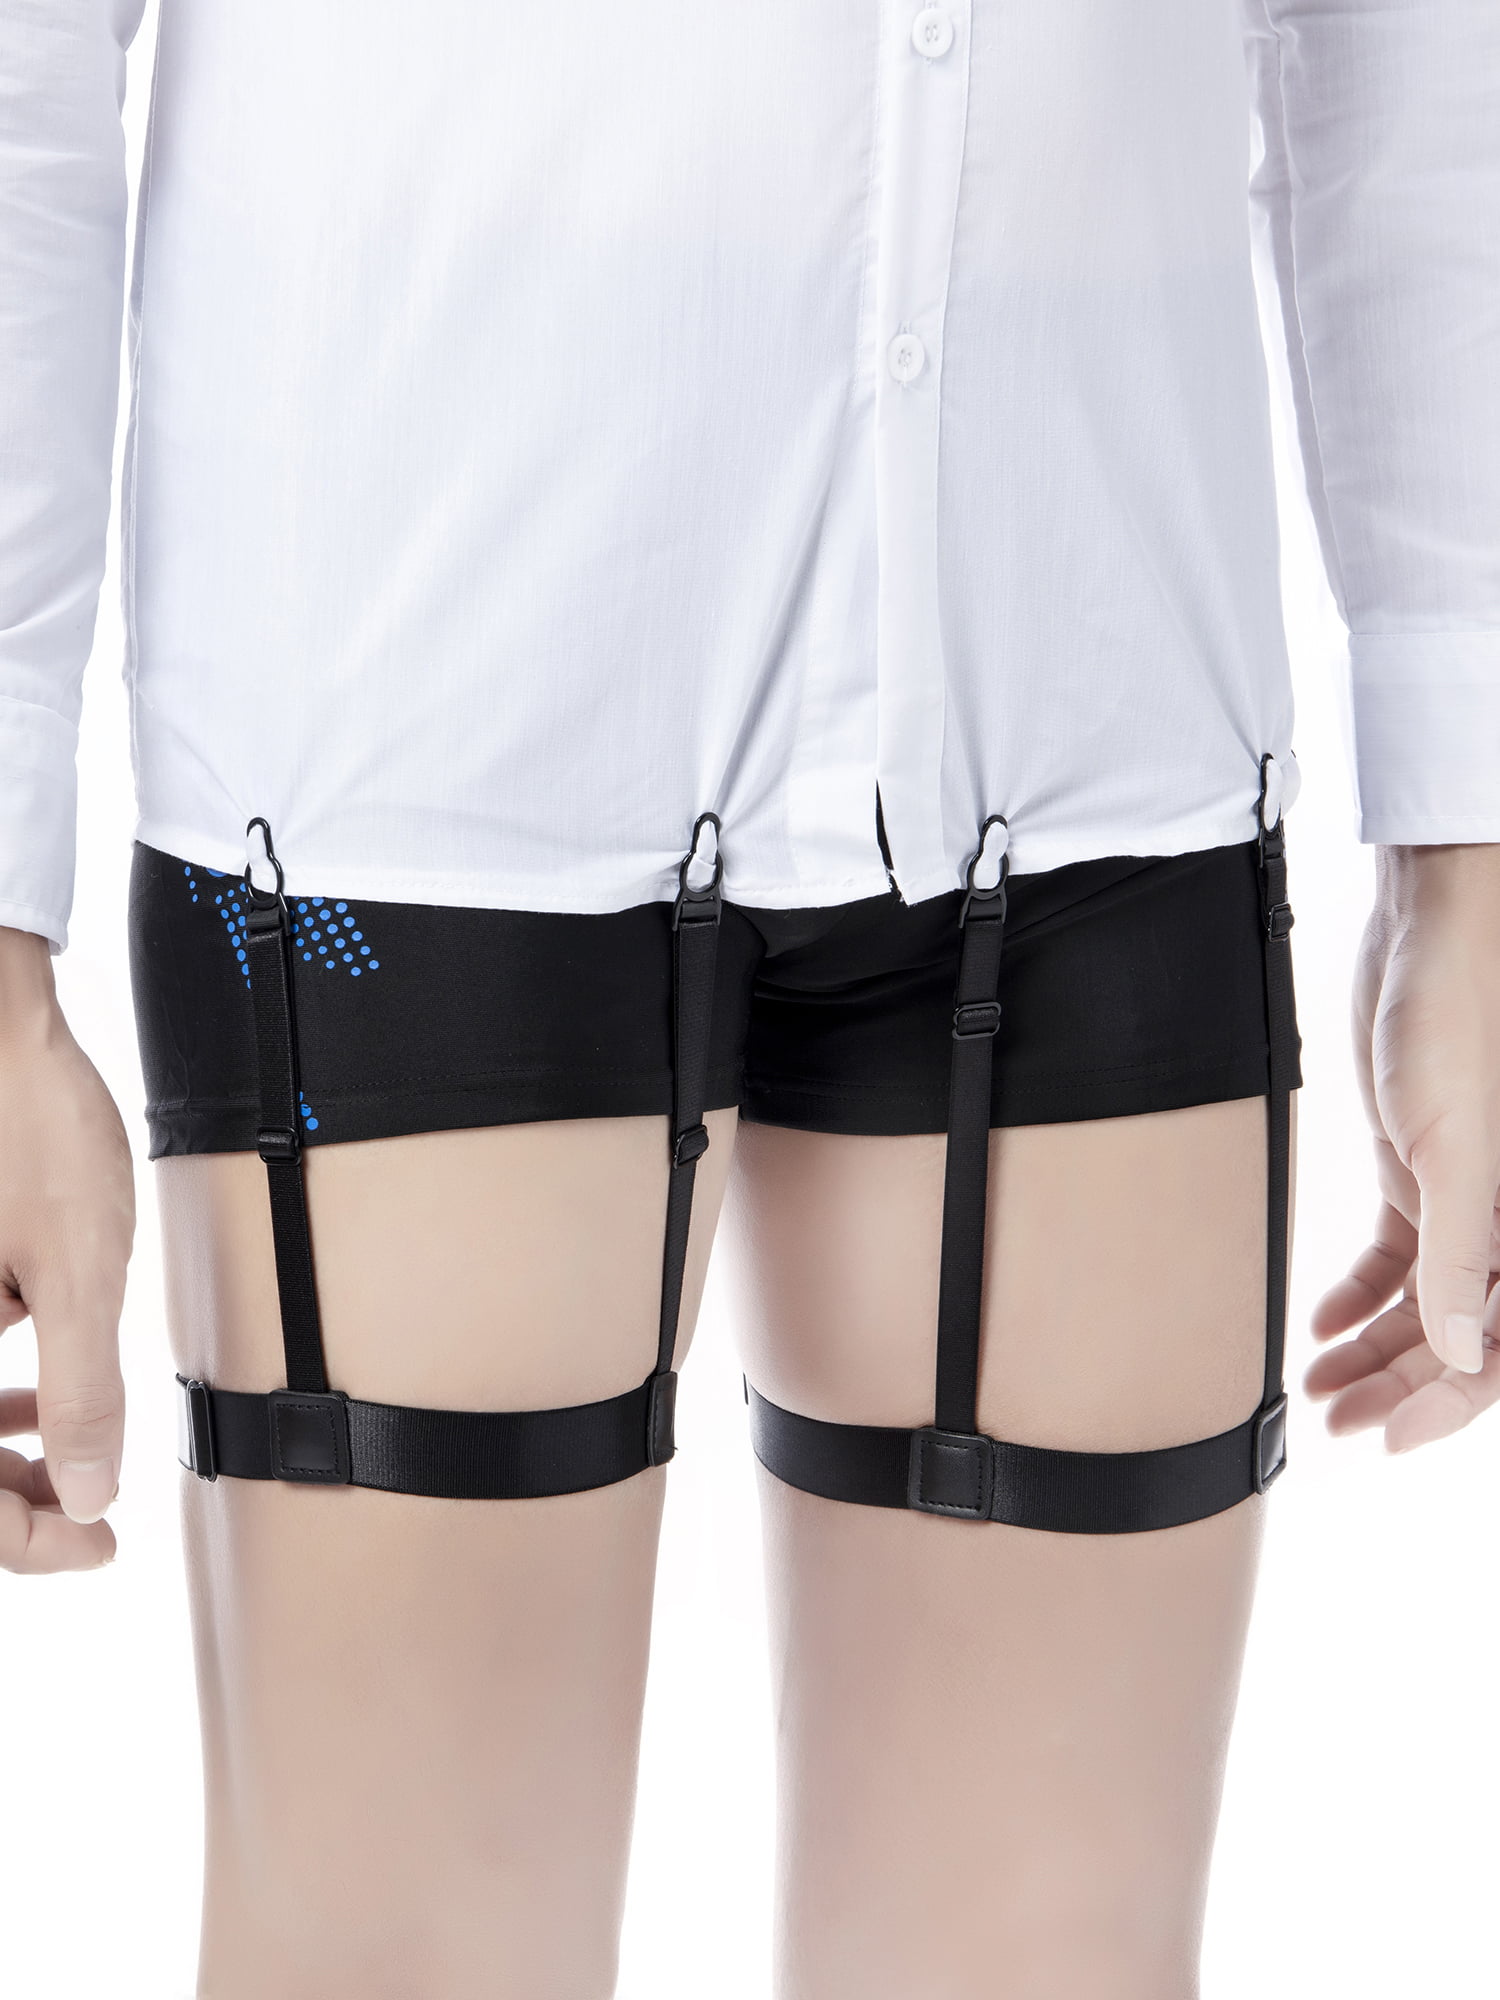 1 Pair Comfortable Braces Suspender Garters for Men Goodbuy Adjustable Shirt Stays with Non-slip Locking Clamps